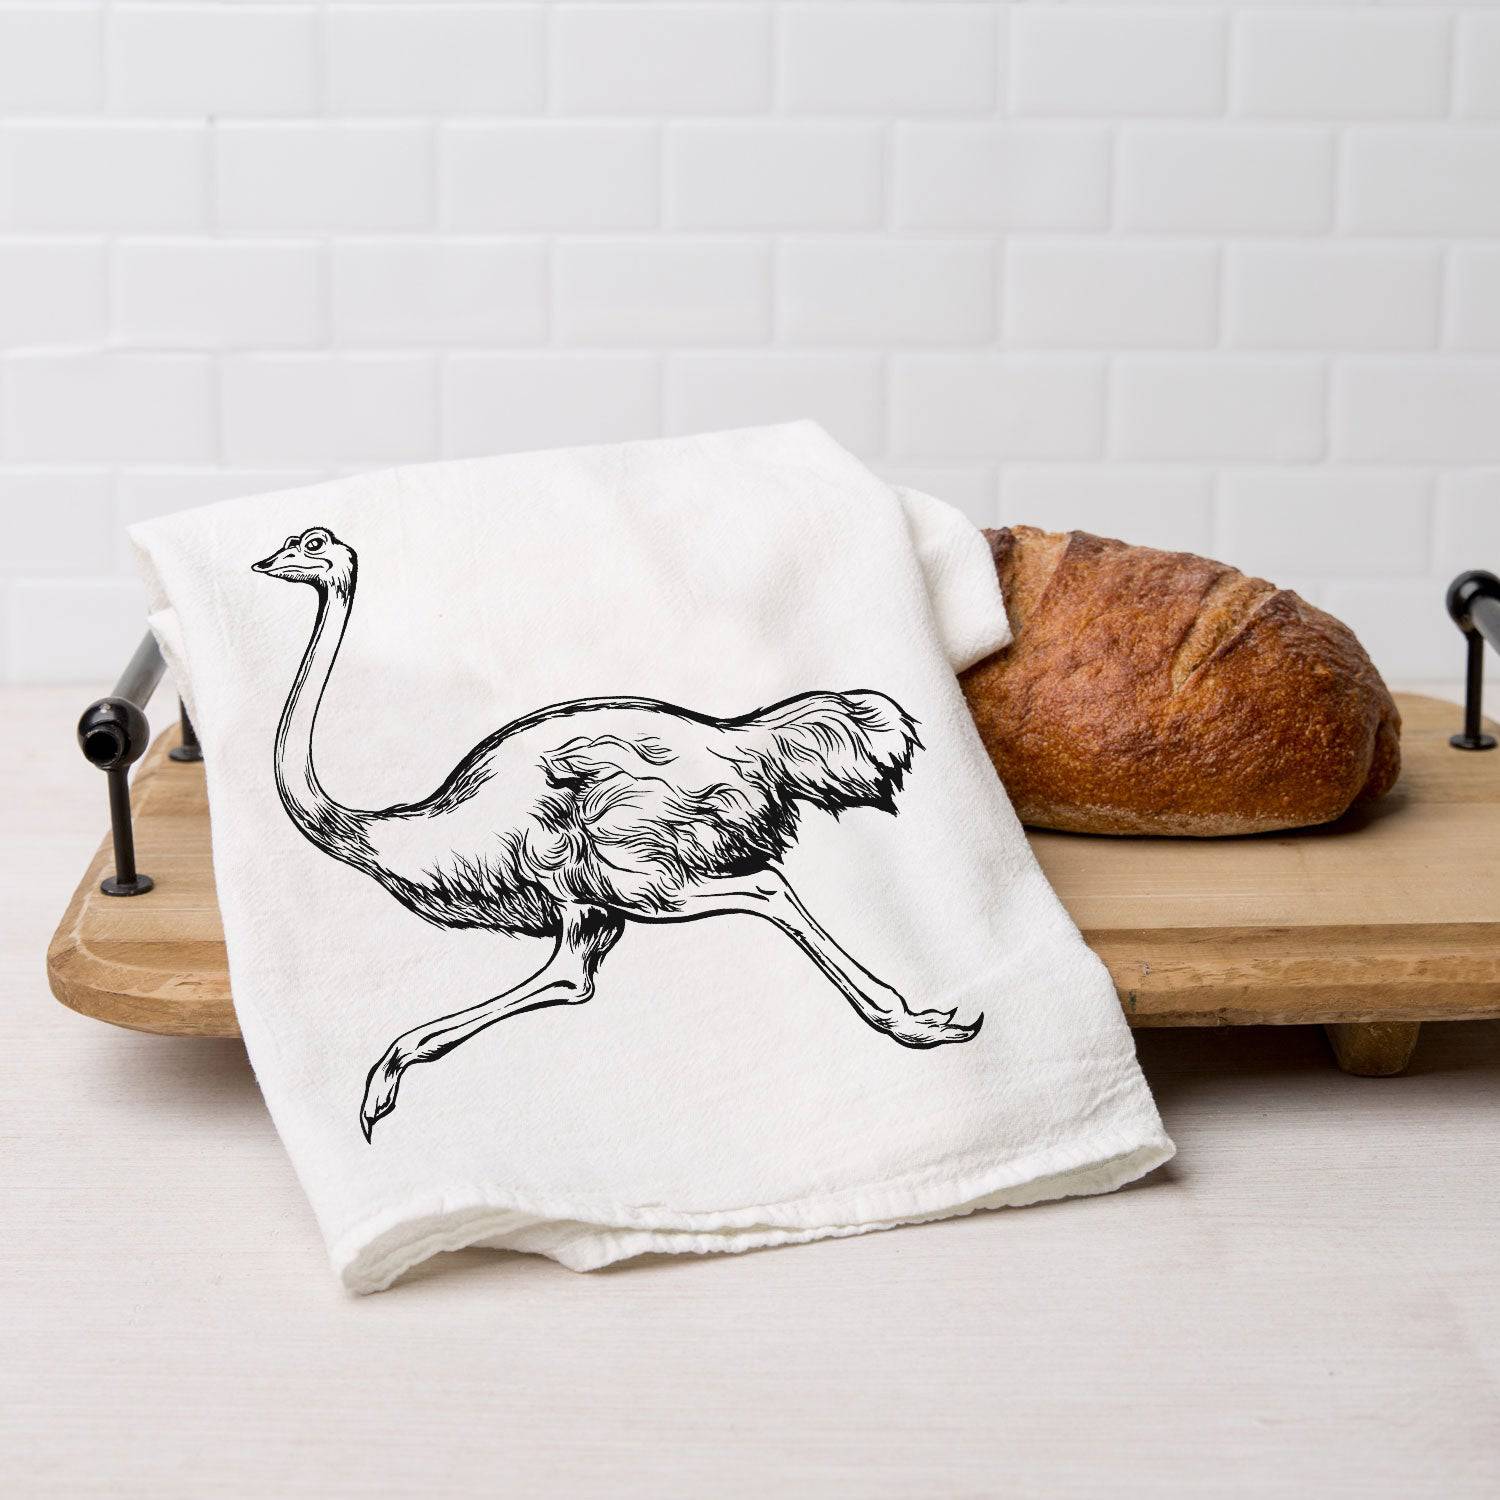 Ostrich Flour Sack Towel -  Dish Towel - Hand Towel - Counter Couture